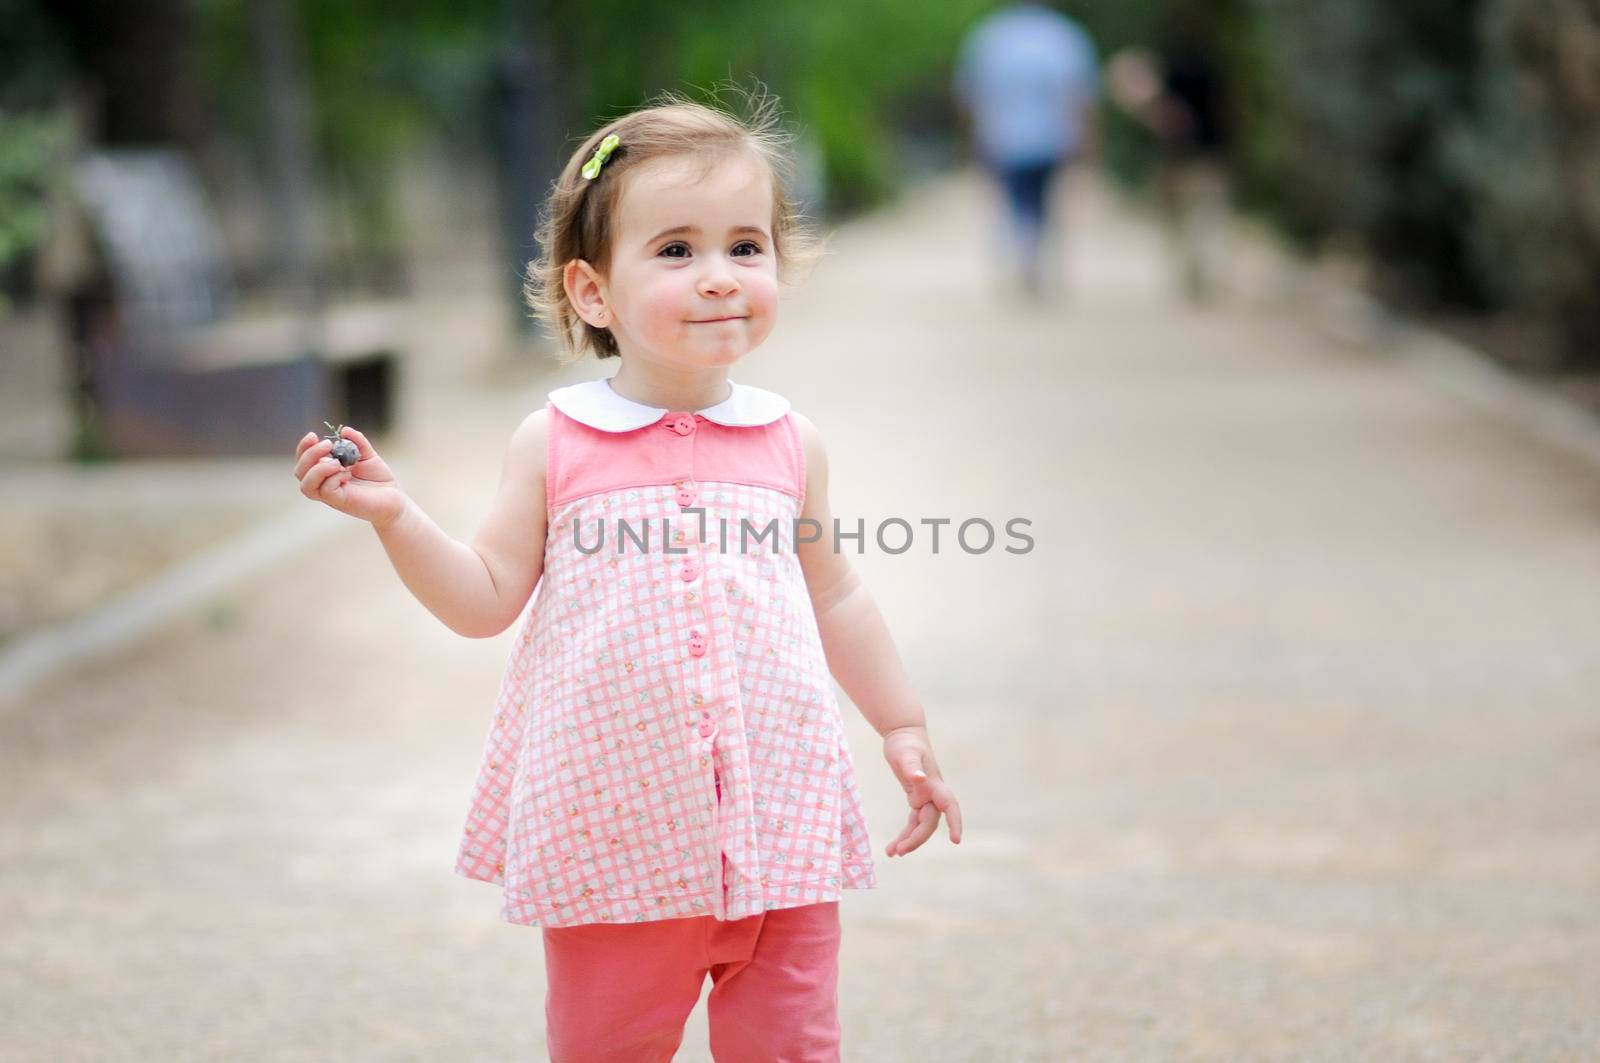 Little girl playing in a urban park by javiindy